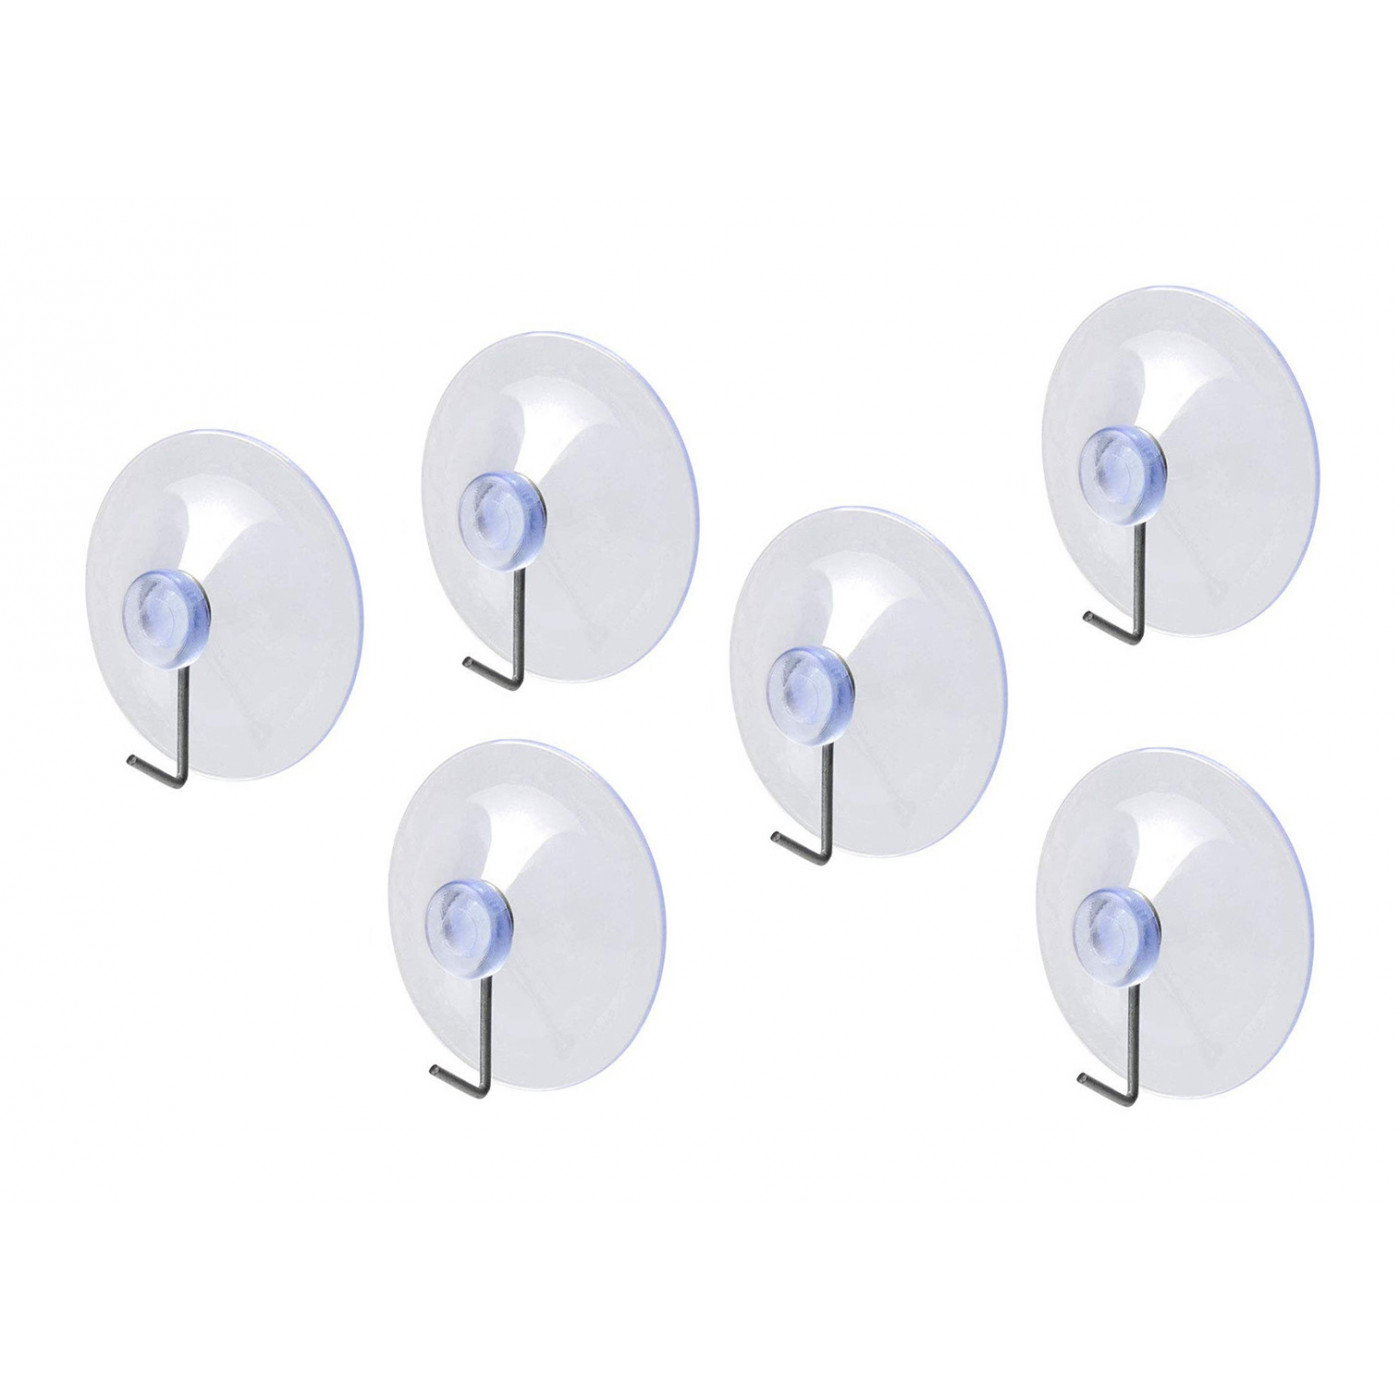 Set of 40 PVC suction cups with metal hook (40 mm diameter)